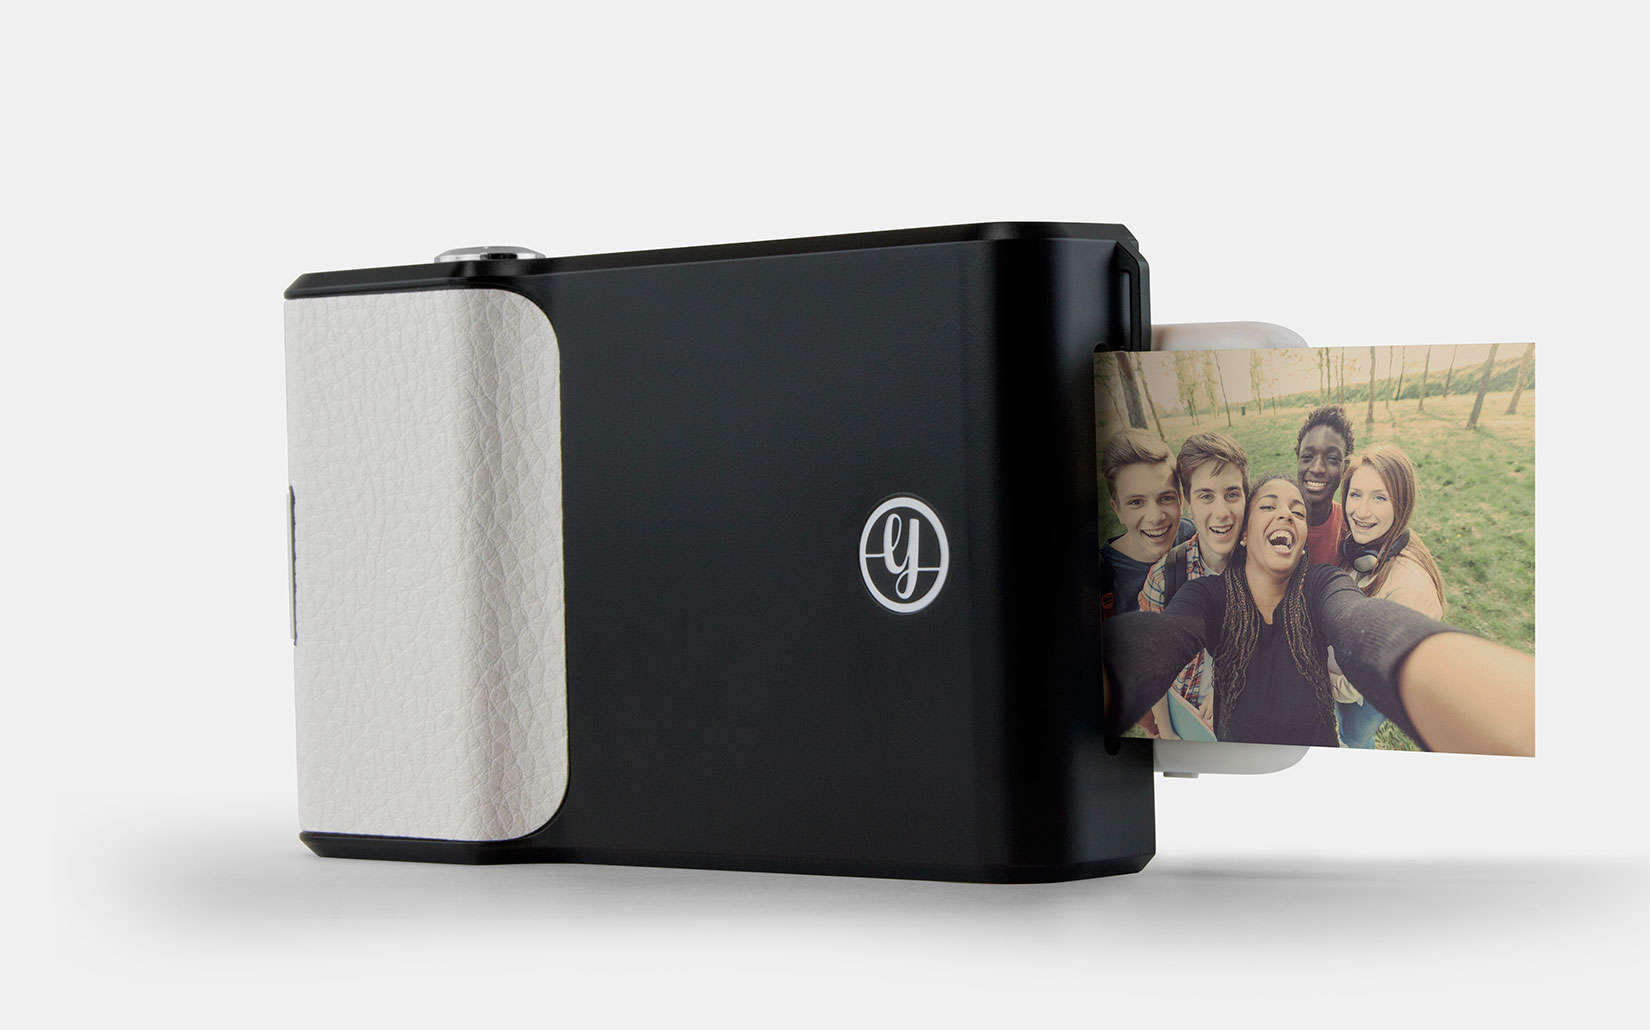 The Prynt Case has a built-in photo printer.